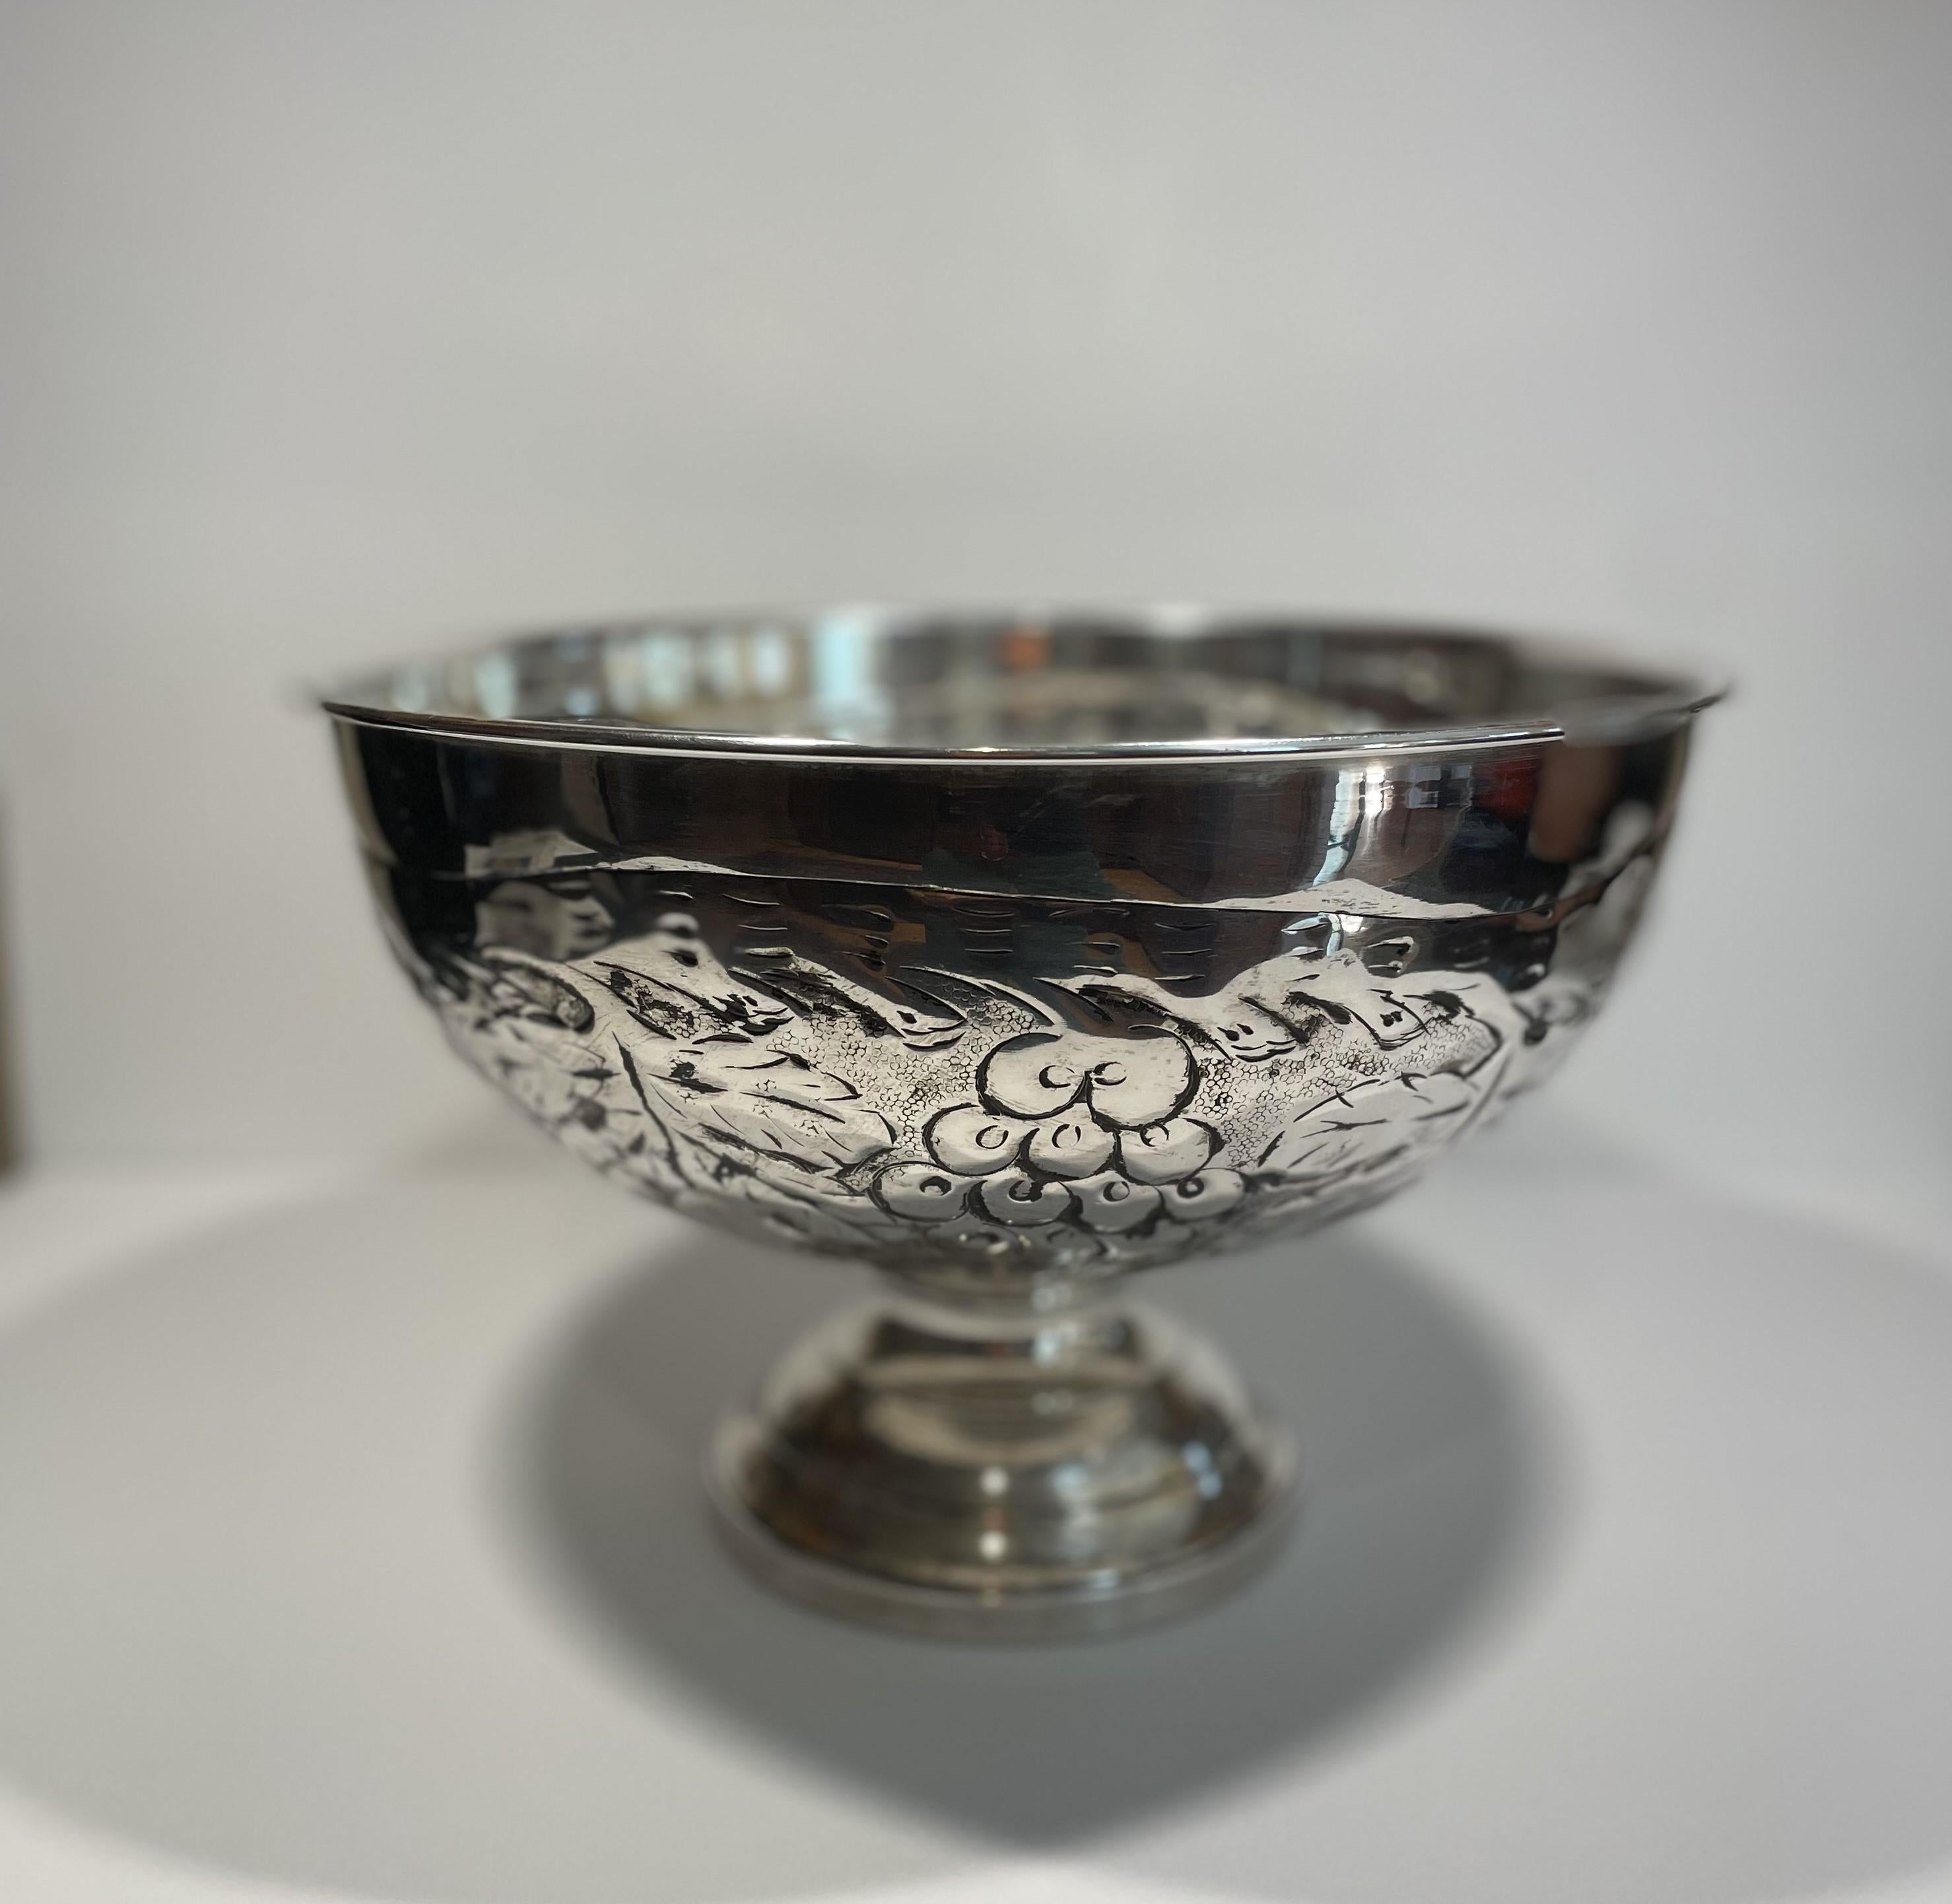 Vintage Artisanal Silver Urn In Excellent Condition For Sale In Austin, TX